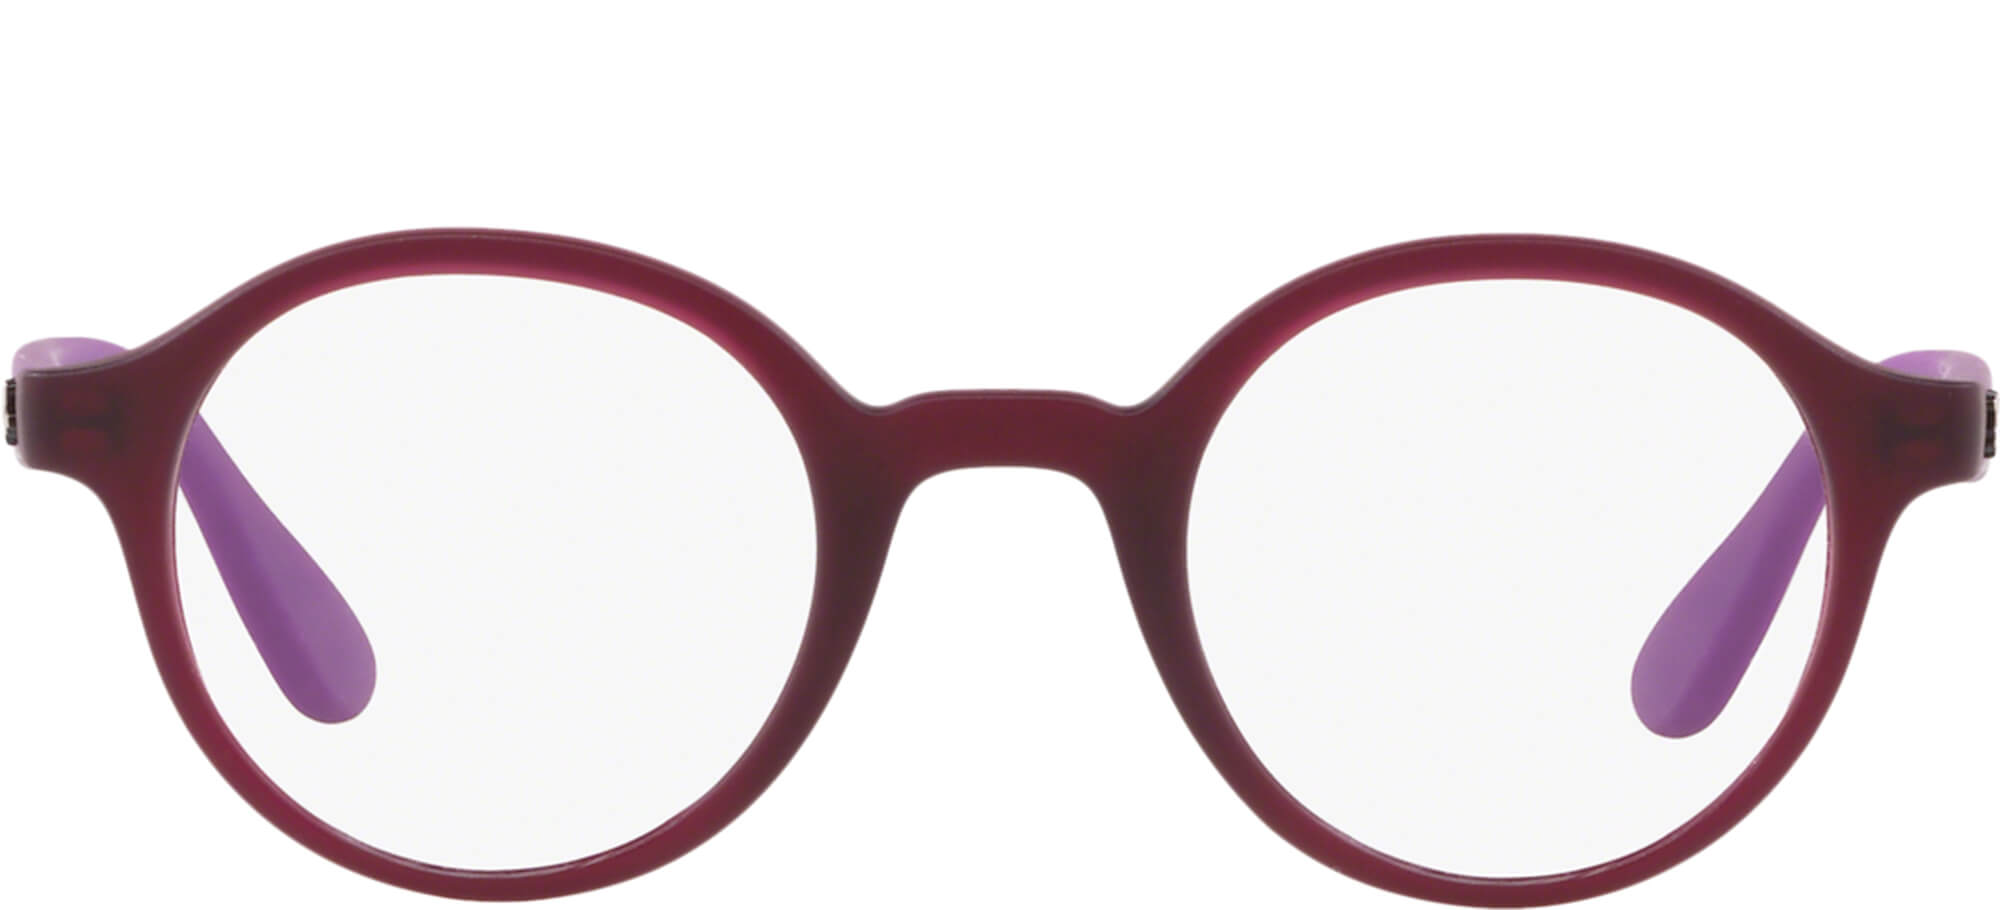 Ray-Ban JuniorRY 1561Red Violet (3782)